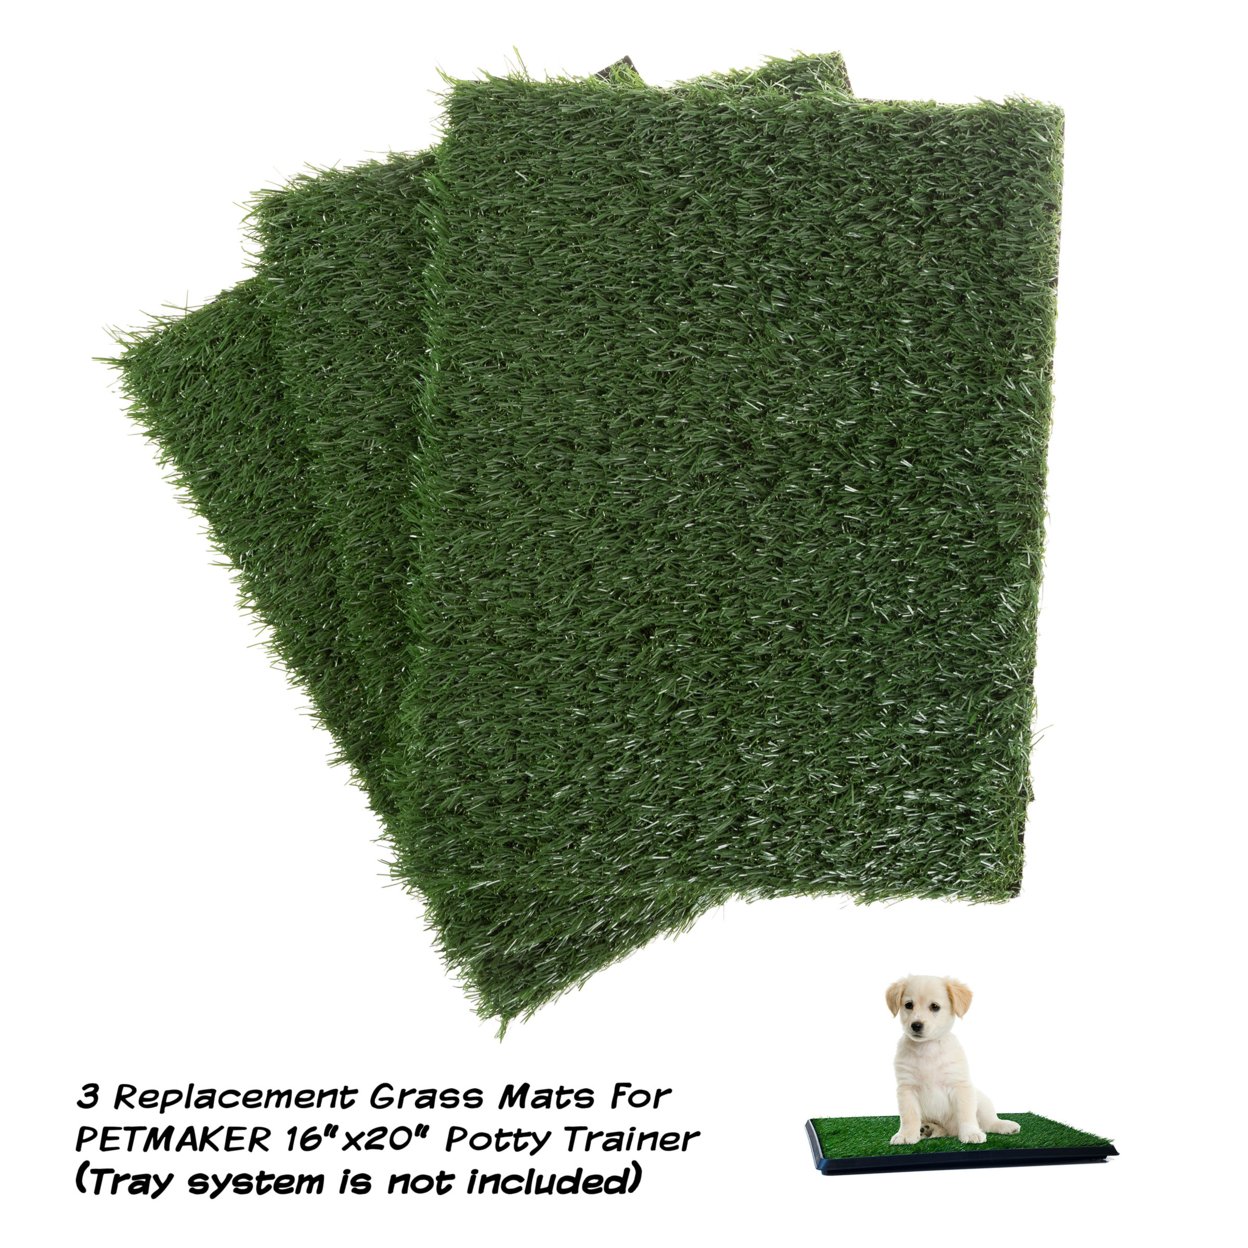 Replacement Grass Mats- Set Of 3 Turf Pads For Puppy Potty Trainer Fake Grass Is 18.5 X 14 Inches